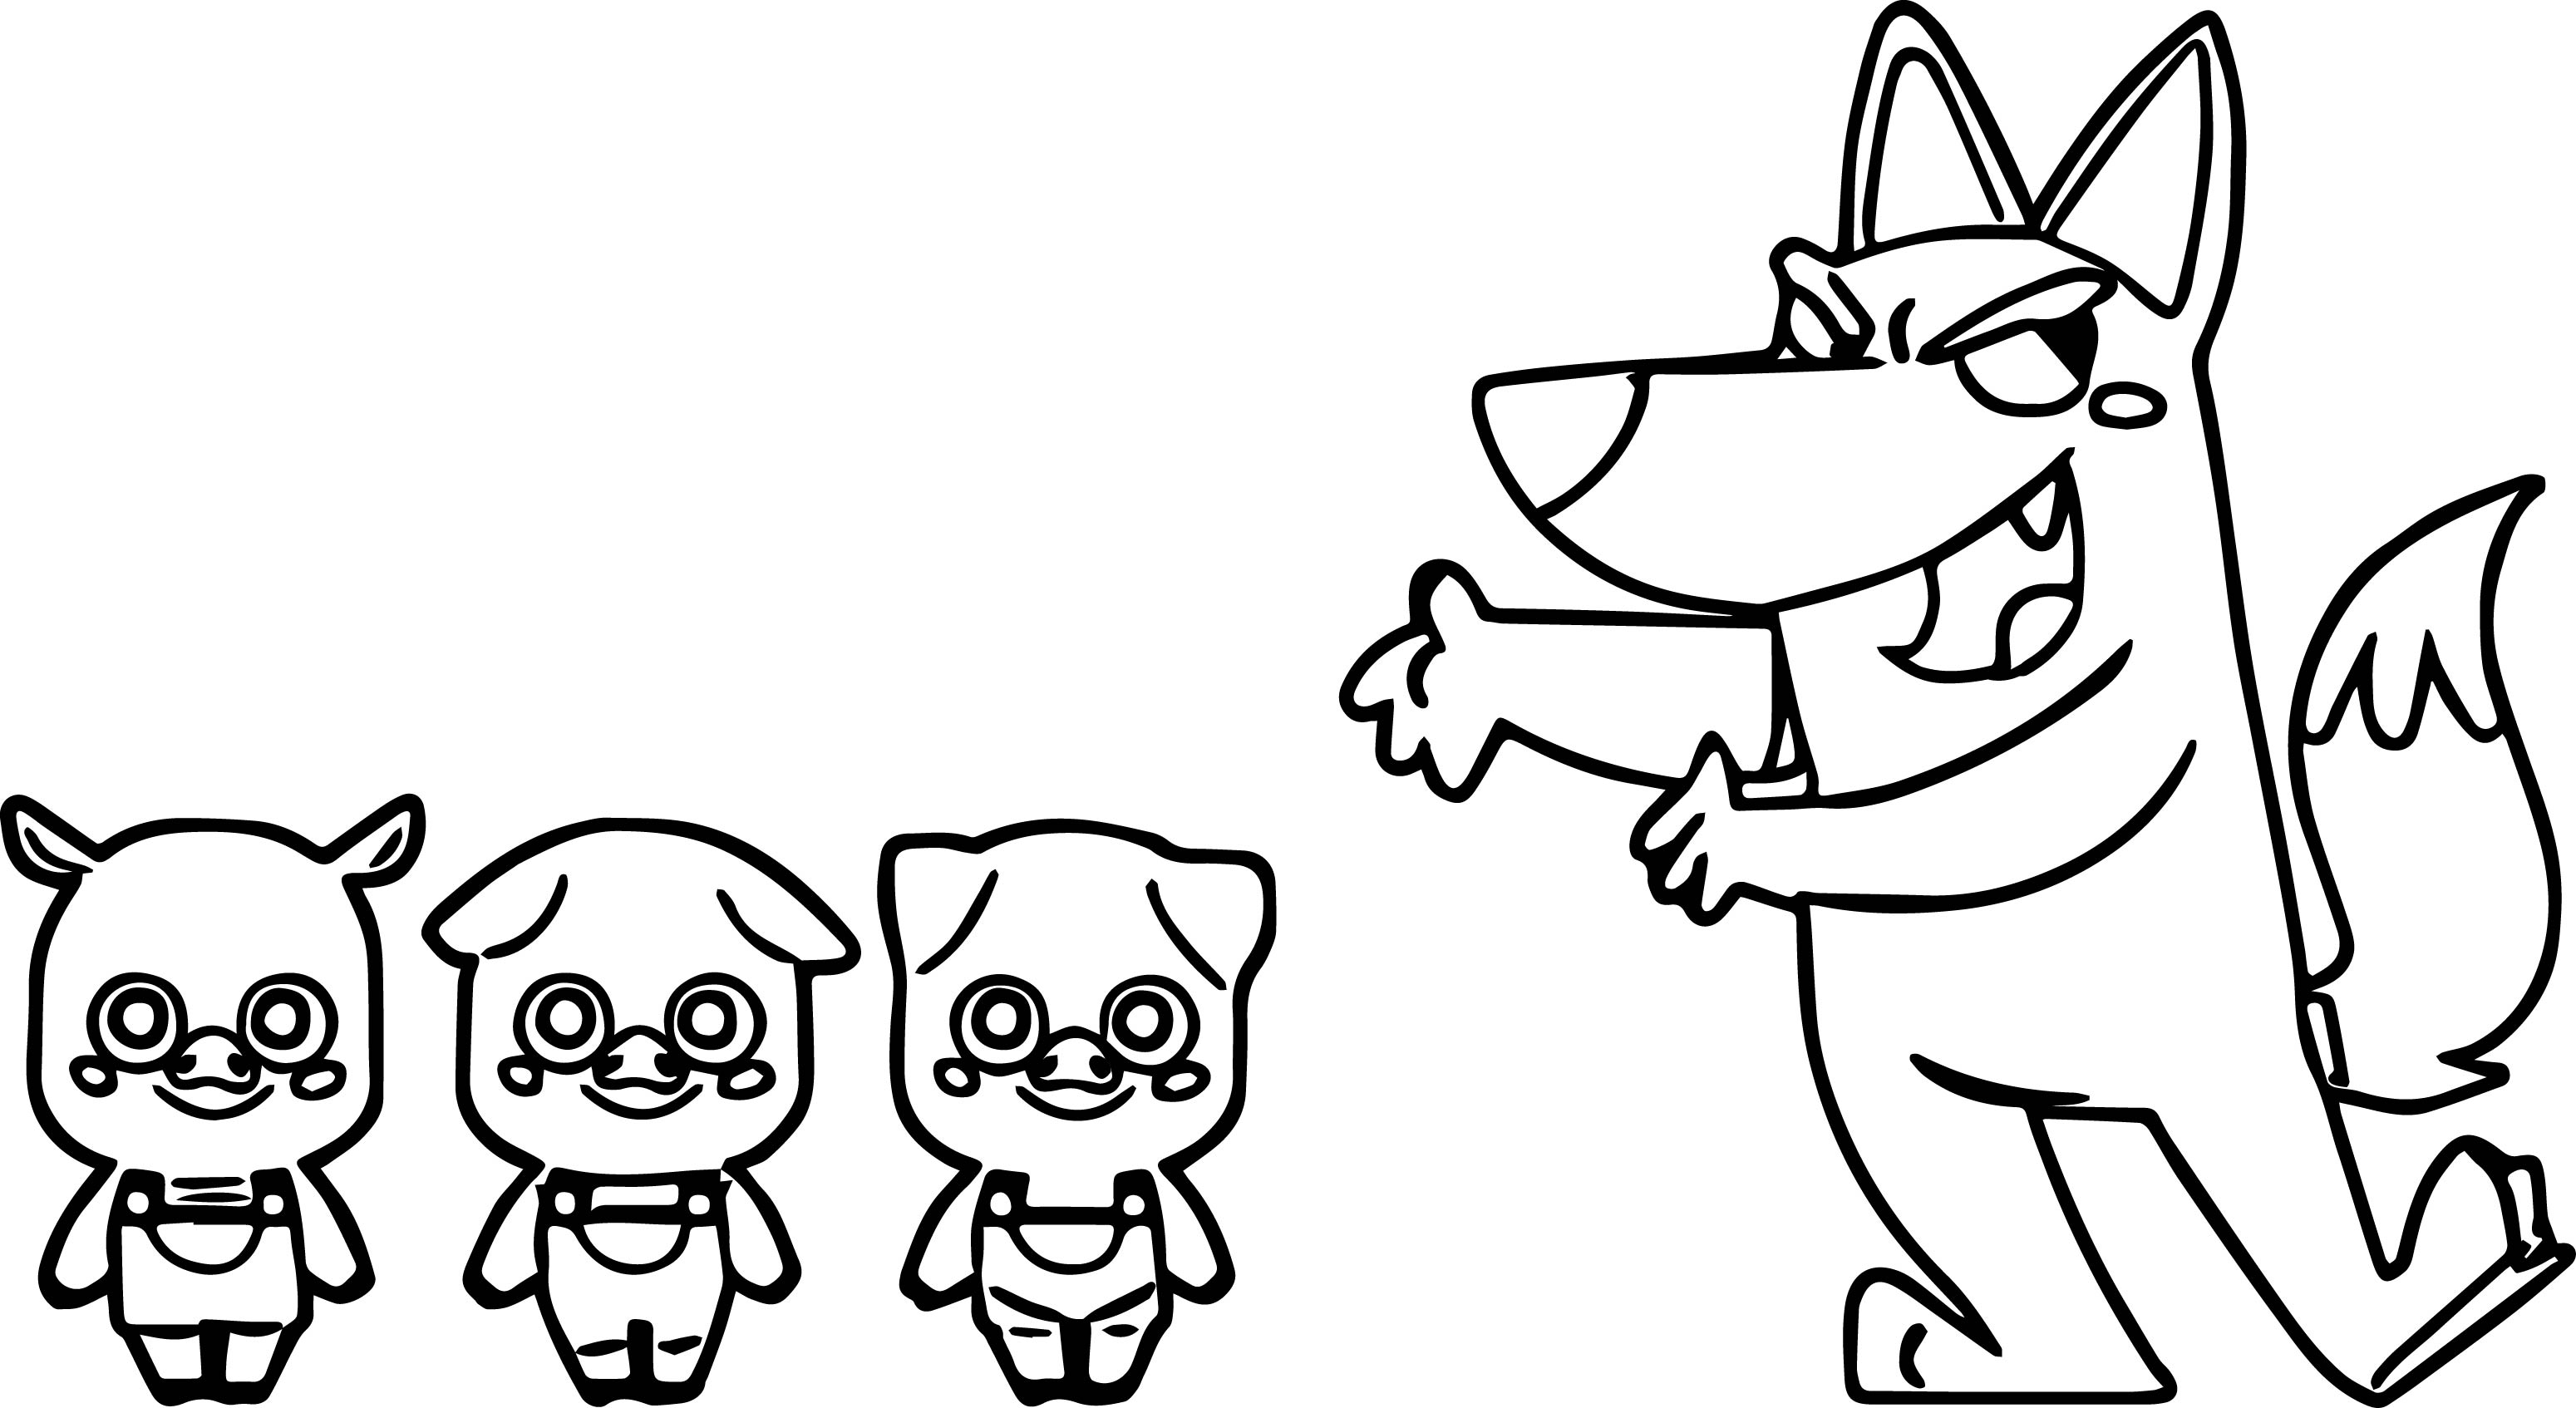 three-little-pigs-coloring-pages-at-getdrawings-free-download